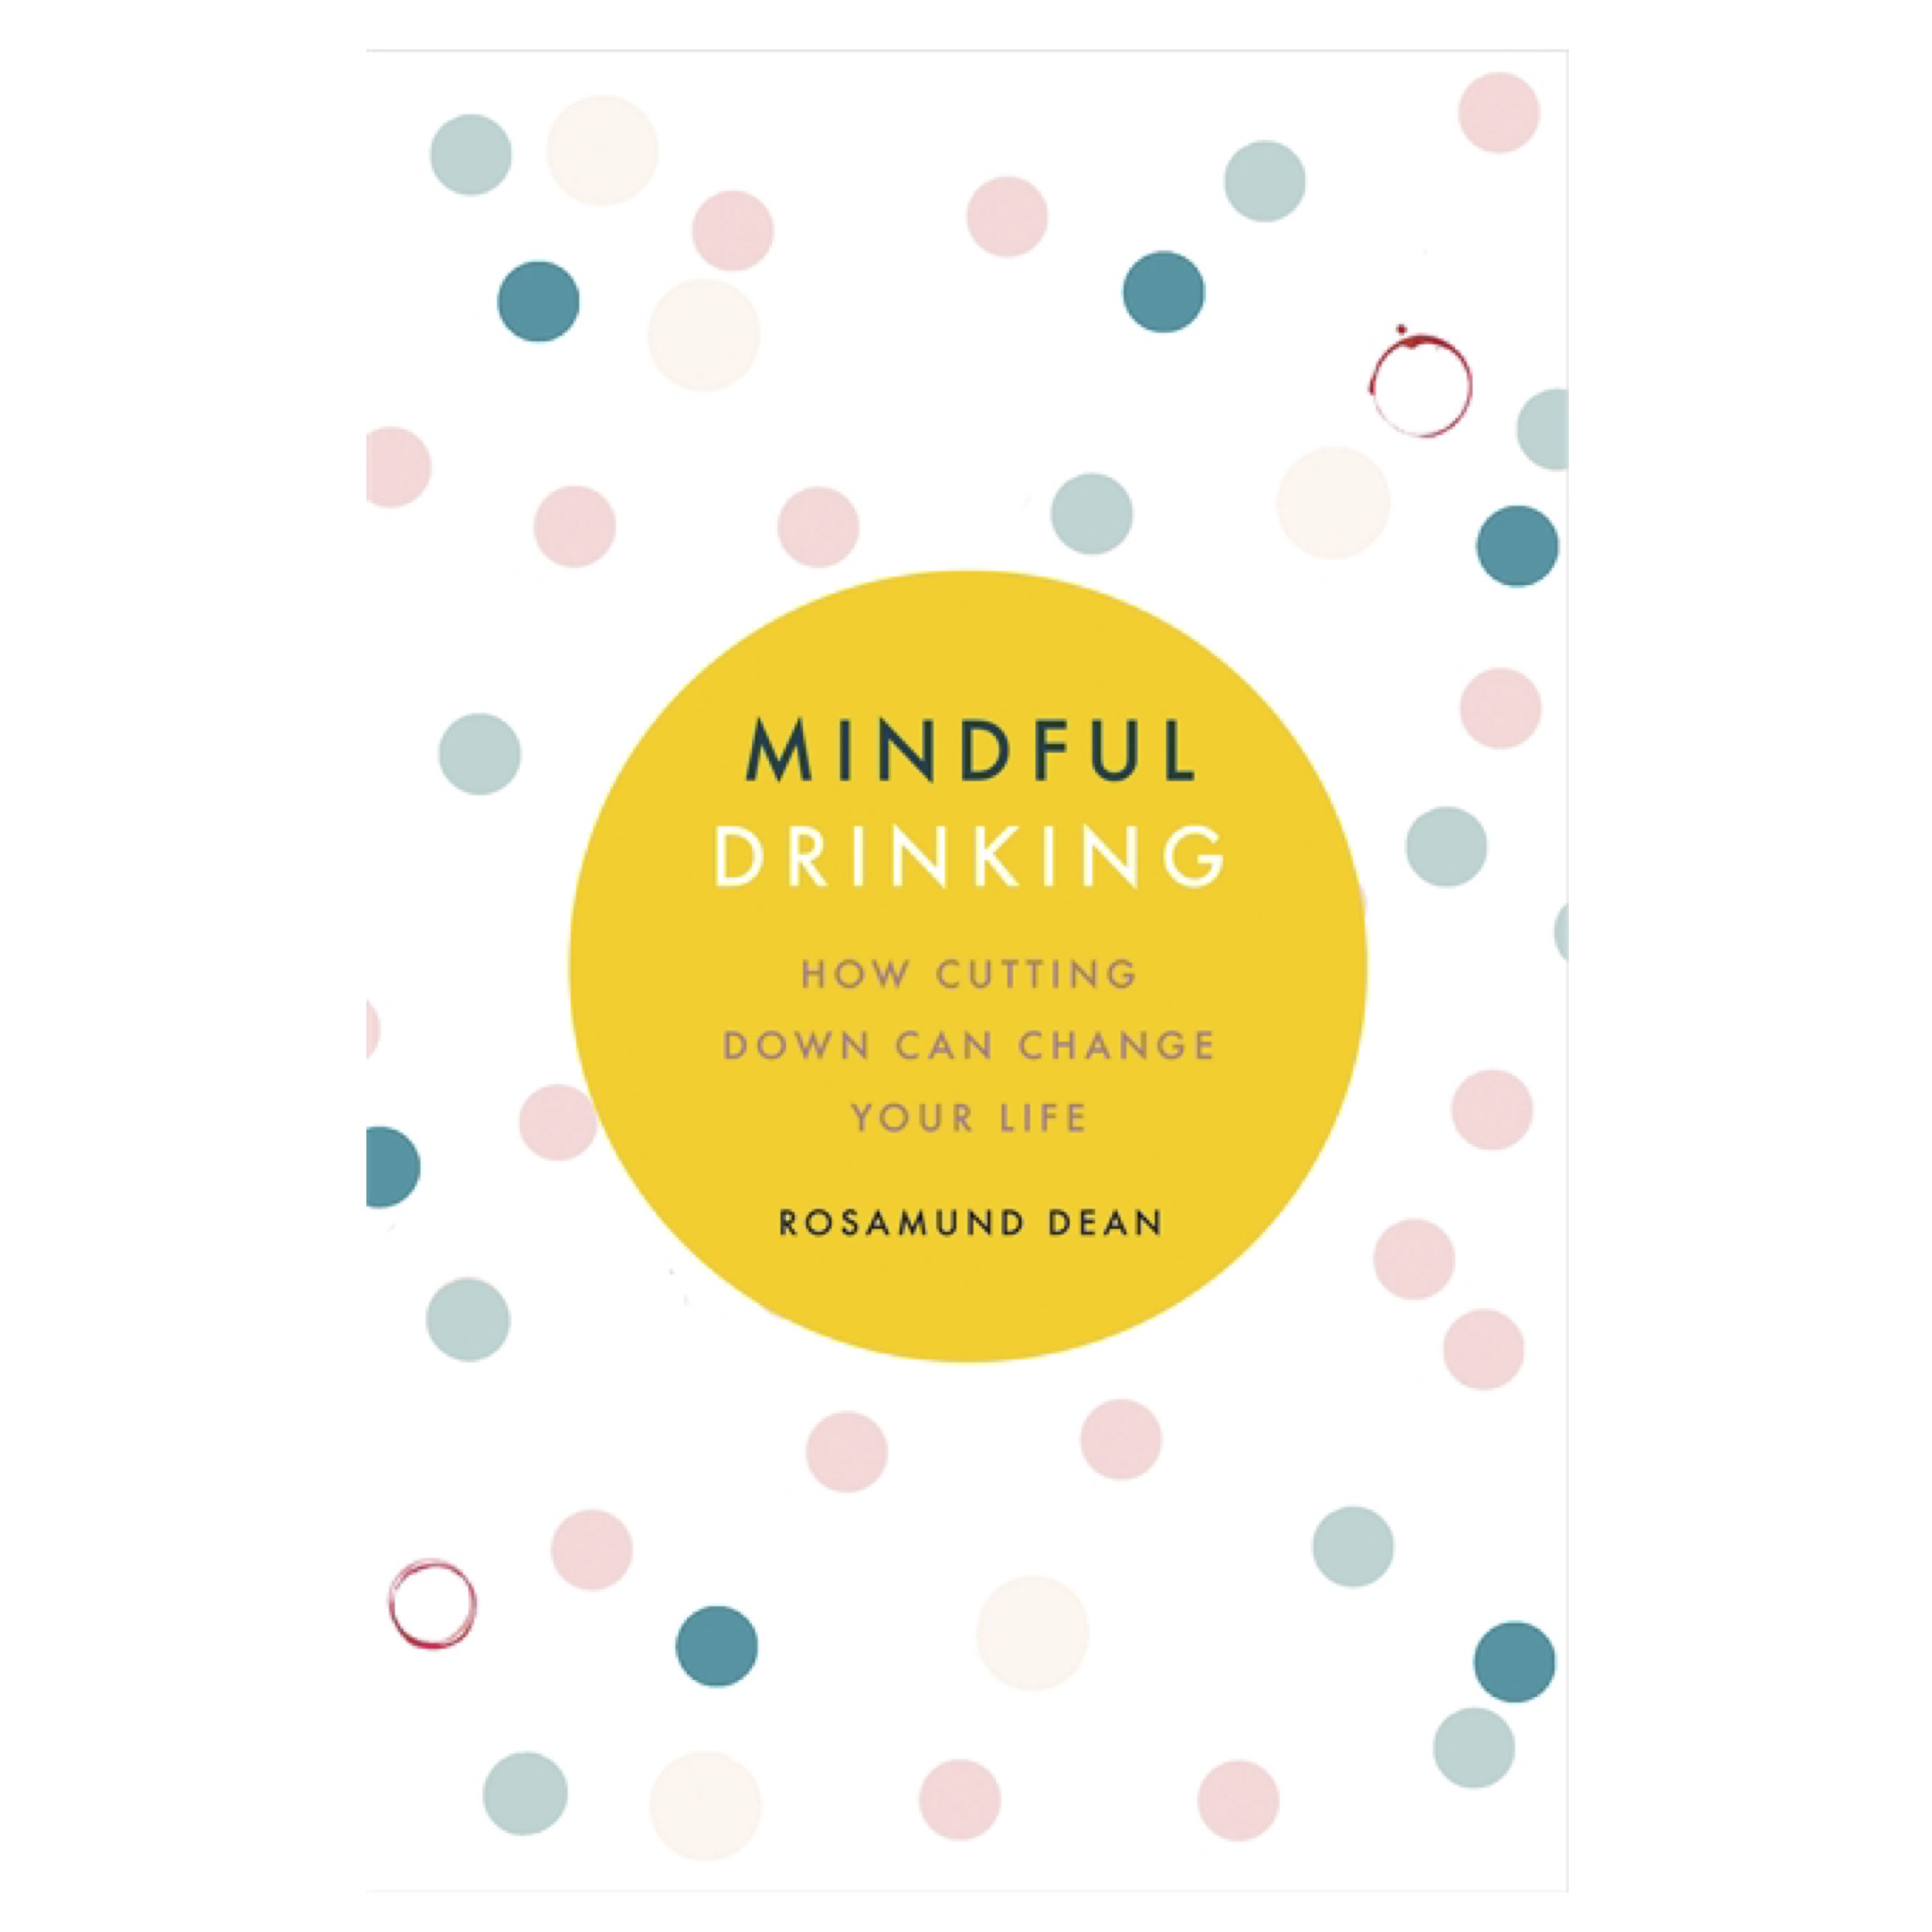 Mindful Drinking: How cutting down can change your life